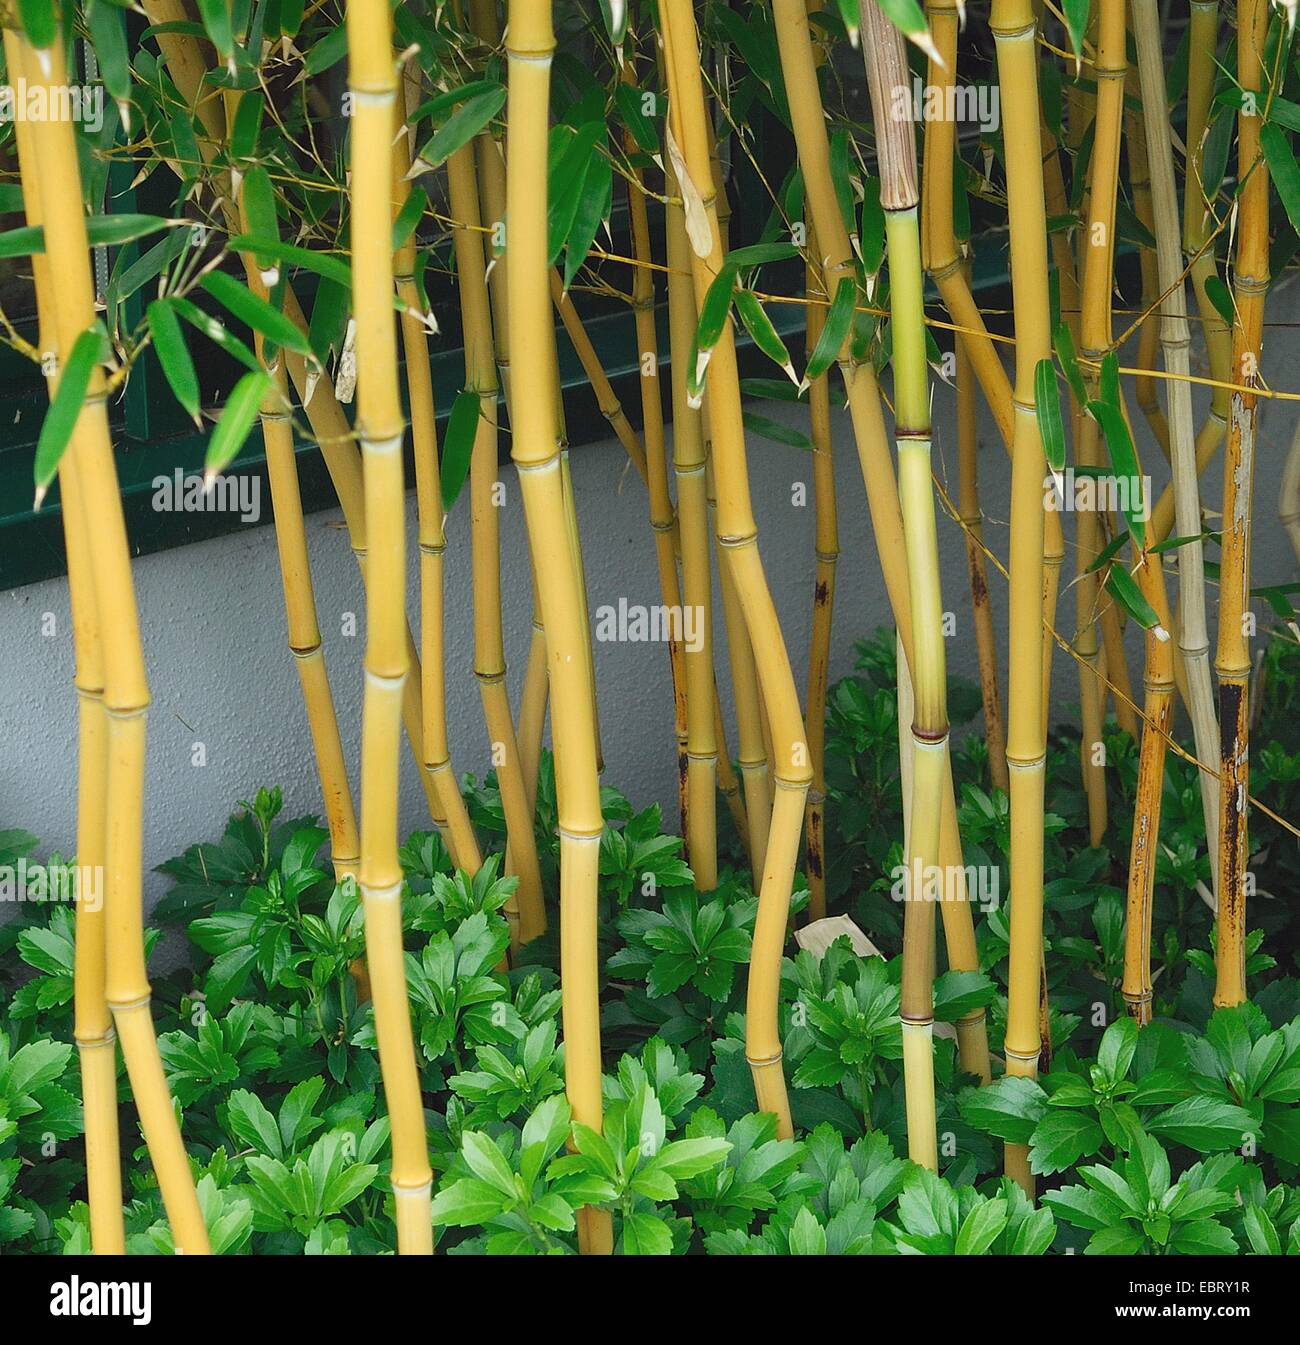 Yellow groove bamboo (Phyllostachys aureosulcata 'Spectabilis', Phyllostachys aureosulcata Spectabilis), cultivar Spectabilis sprouts, together with Pachysandra terminalis Stock Photo